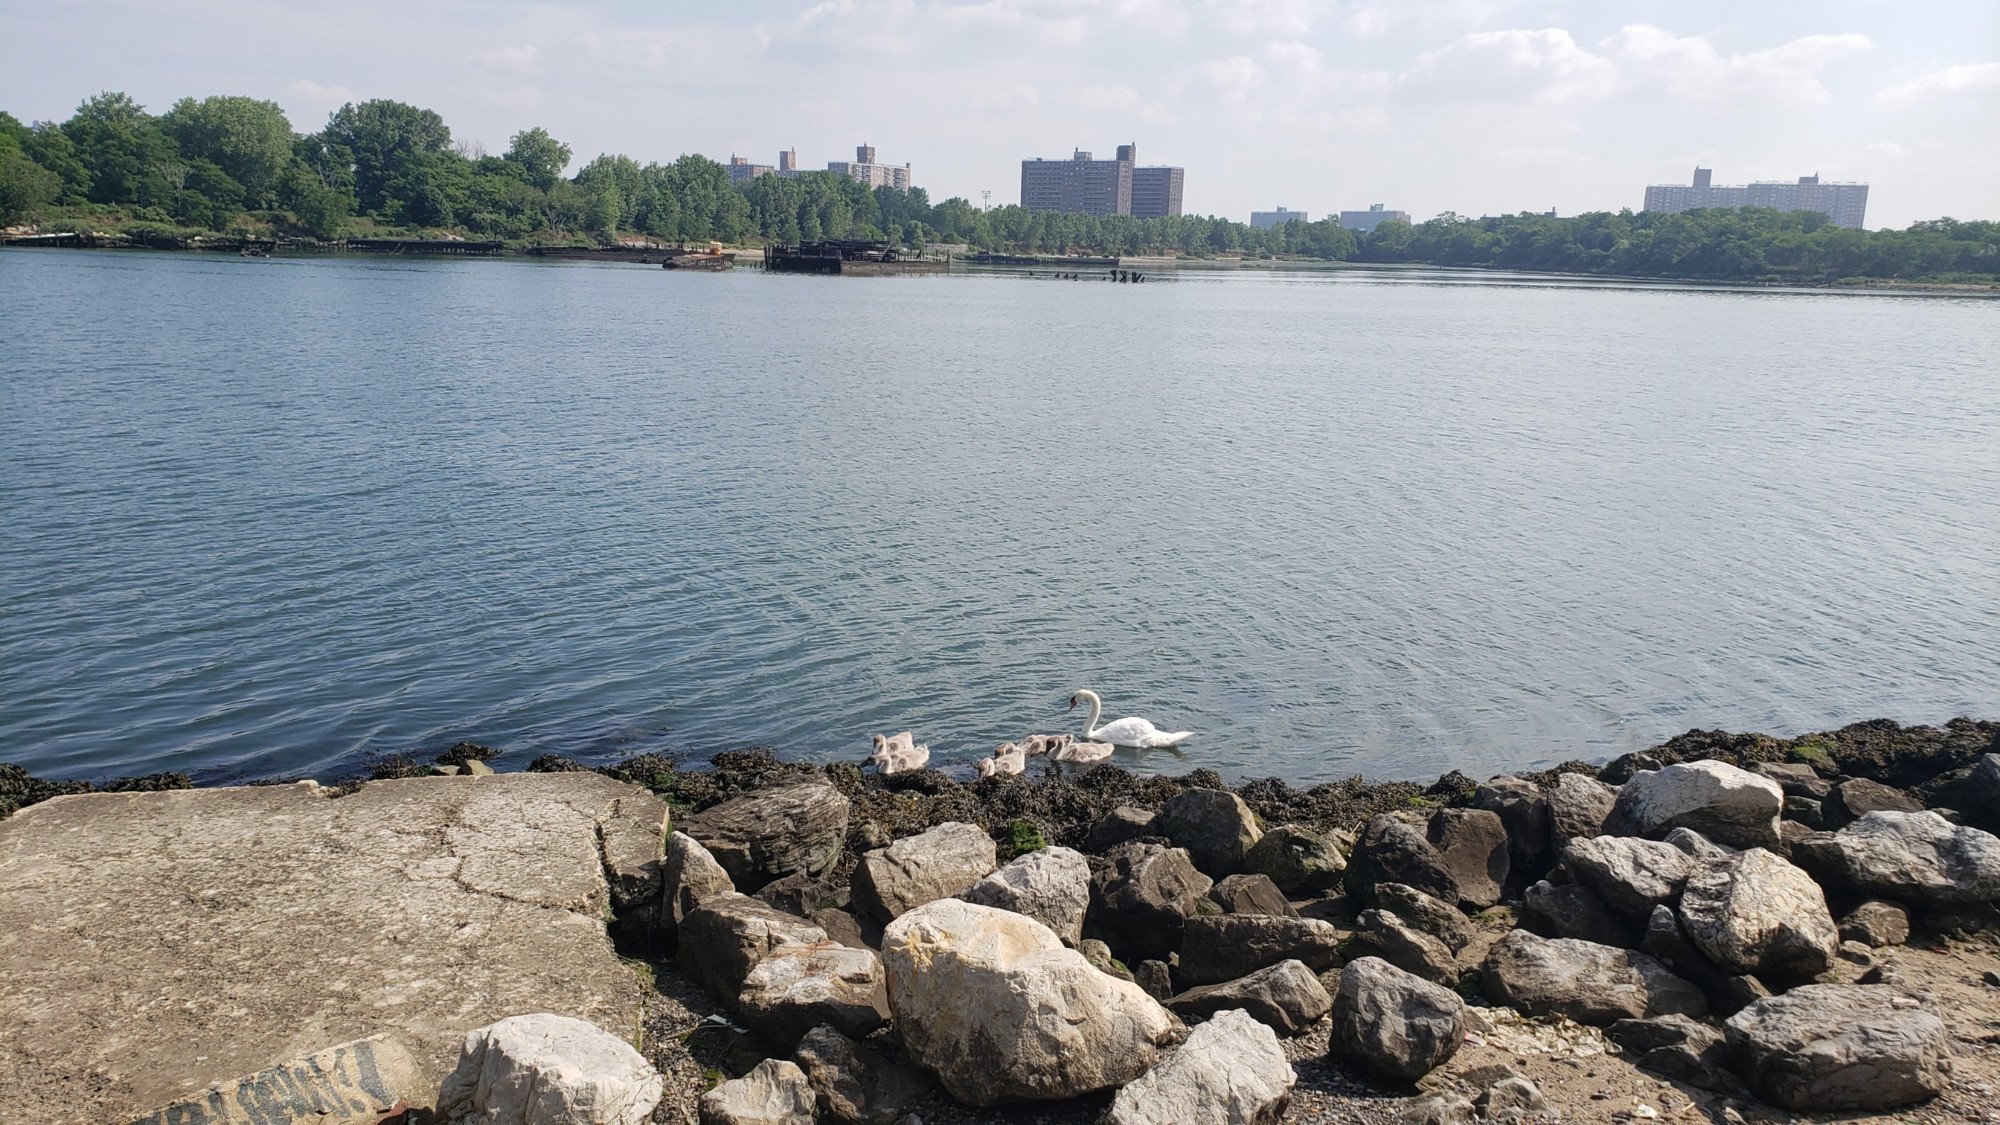 Last one from Coney Island Creek, swan and cygnets along the creek, derelict boats in the background (including the famed Coney Island Yellow Submarine)